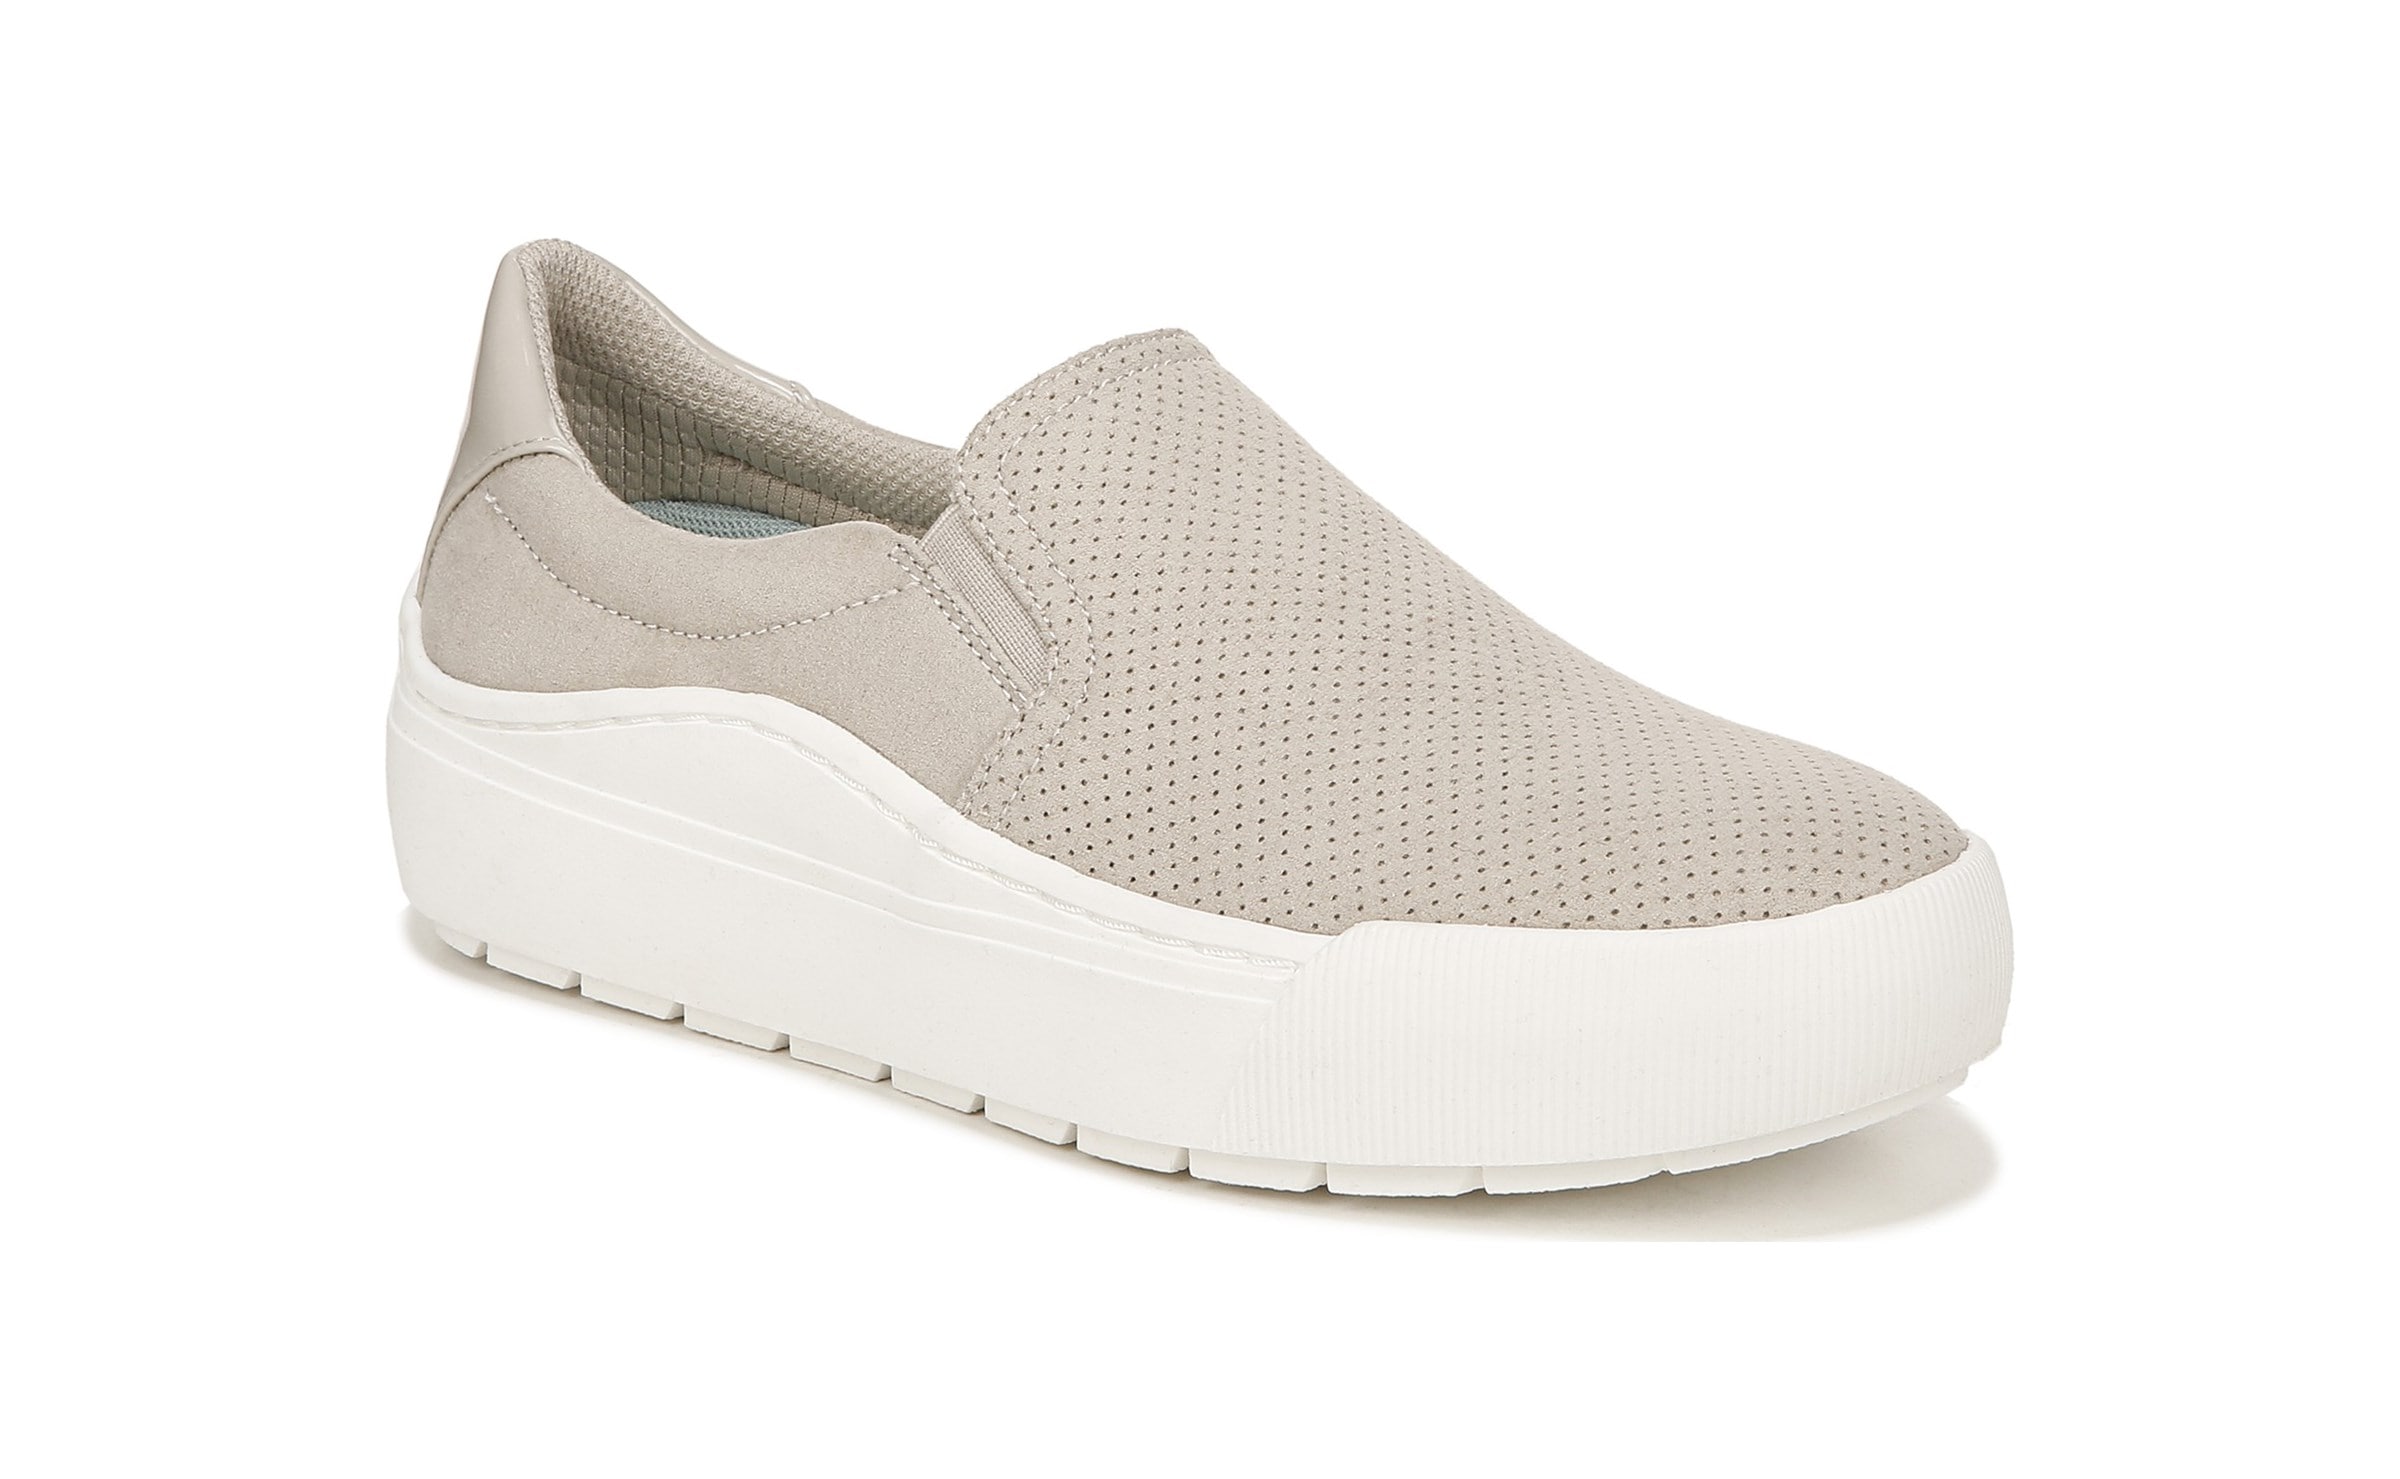 Dr. Scholl's Womens Time Off Sneaker - White